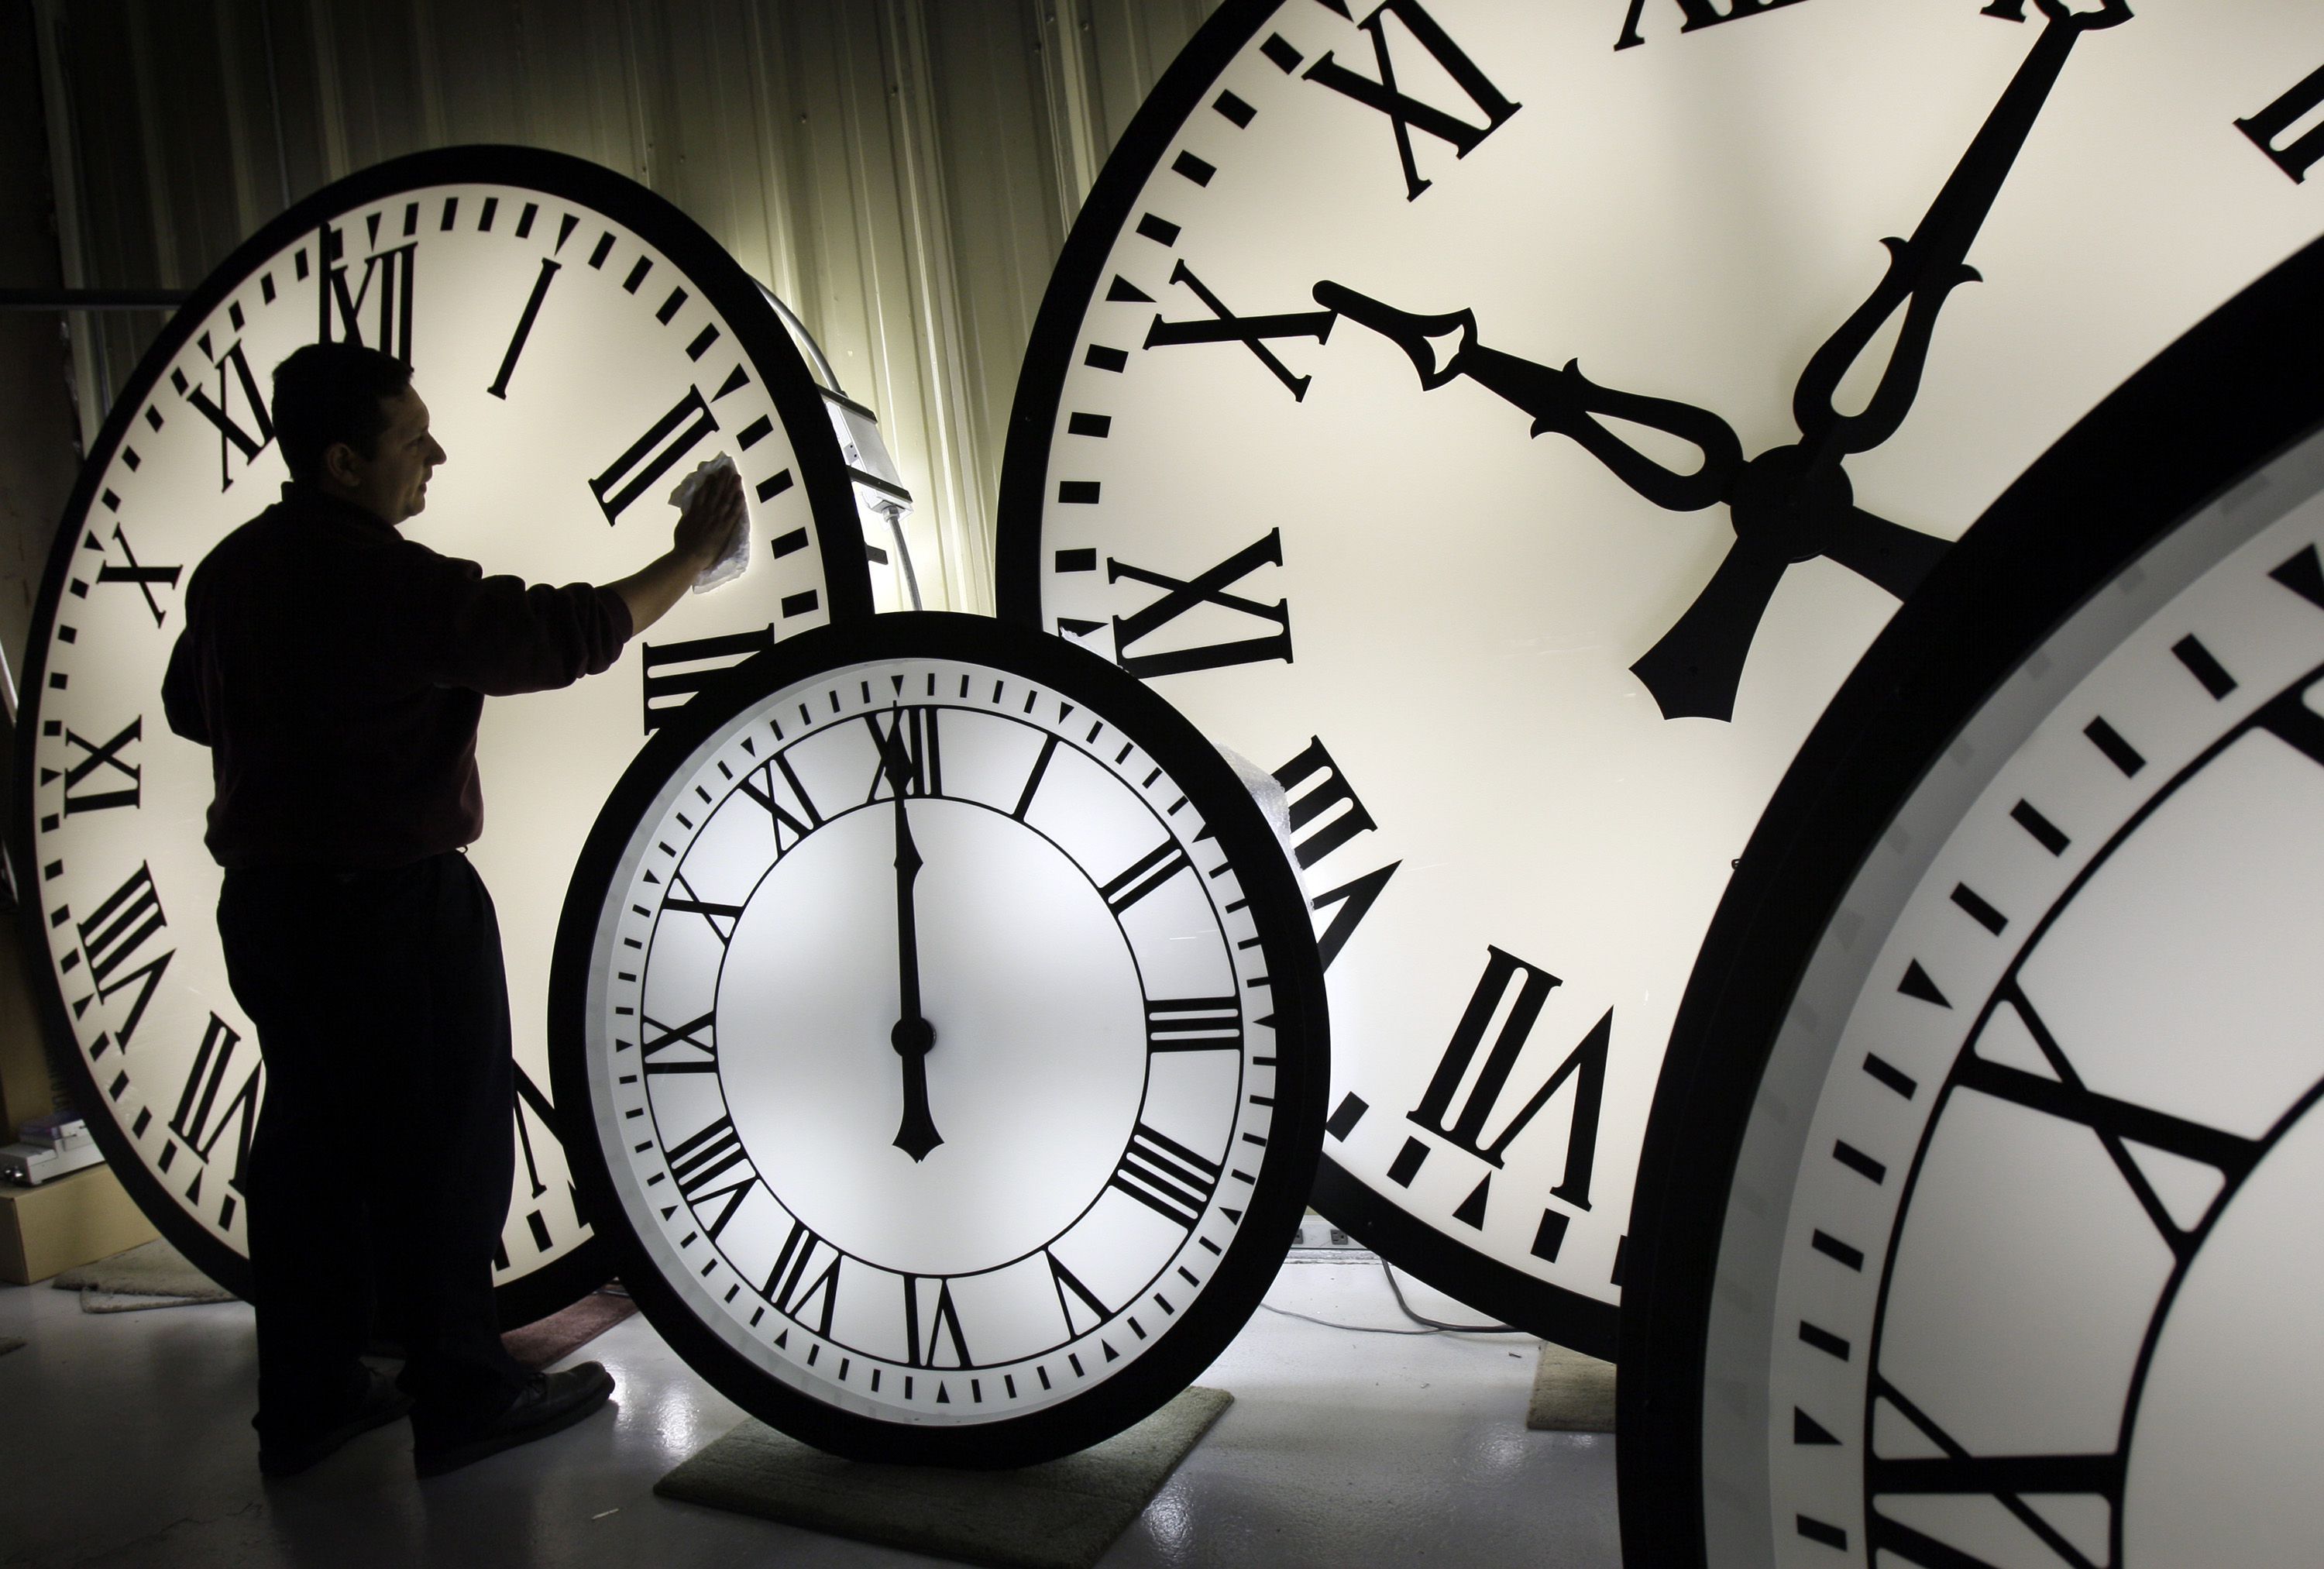 When does Daylight Saving Time end in 2021? Soon the days will